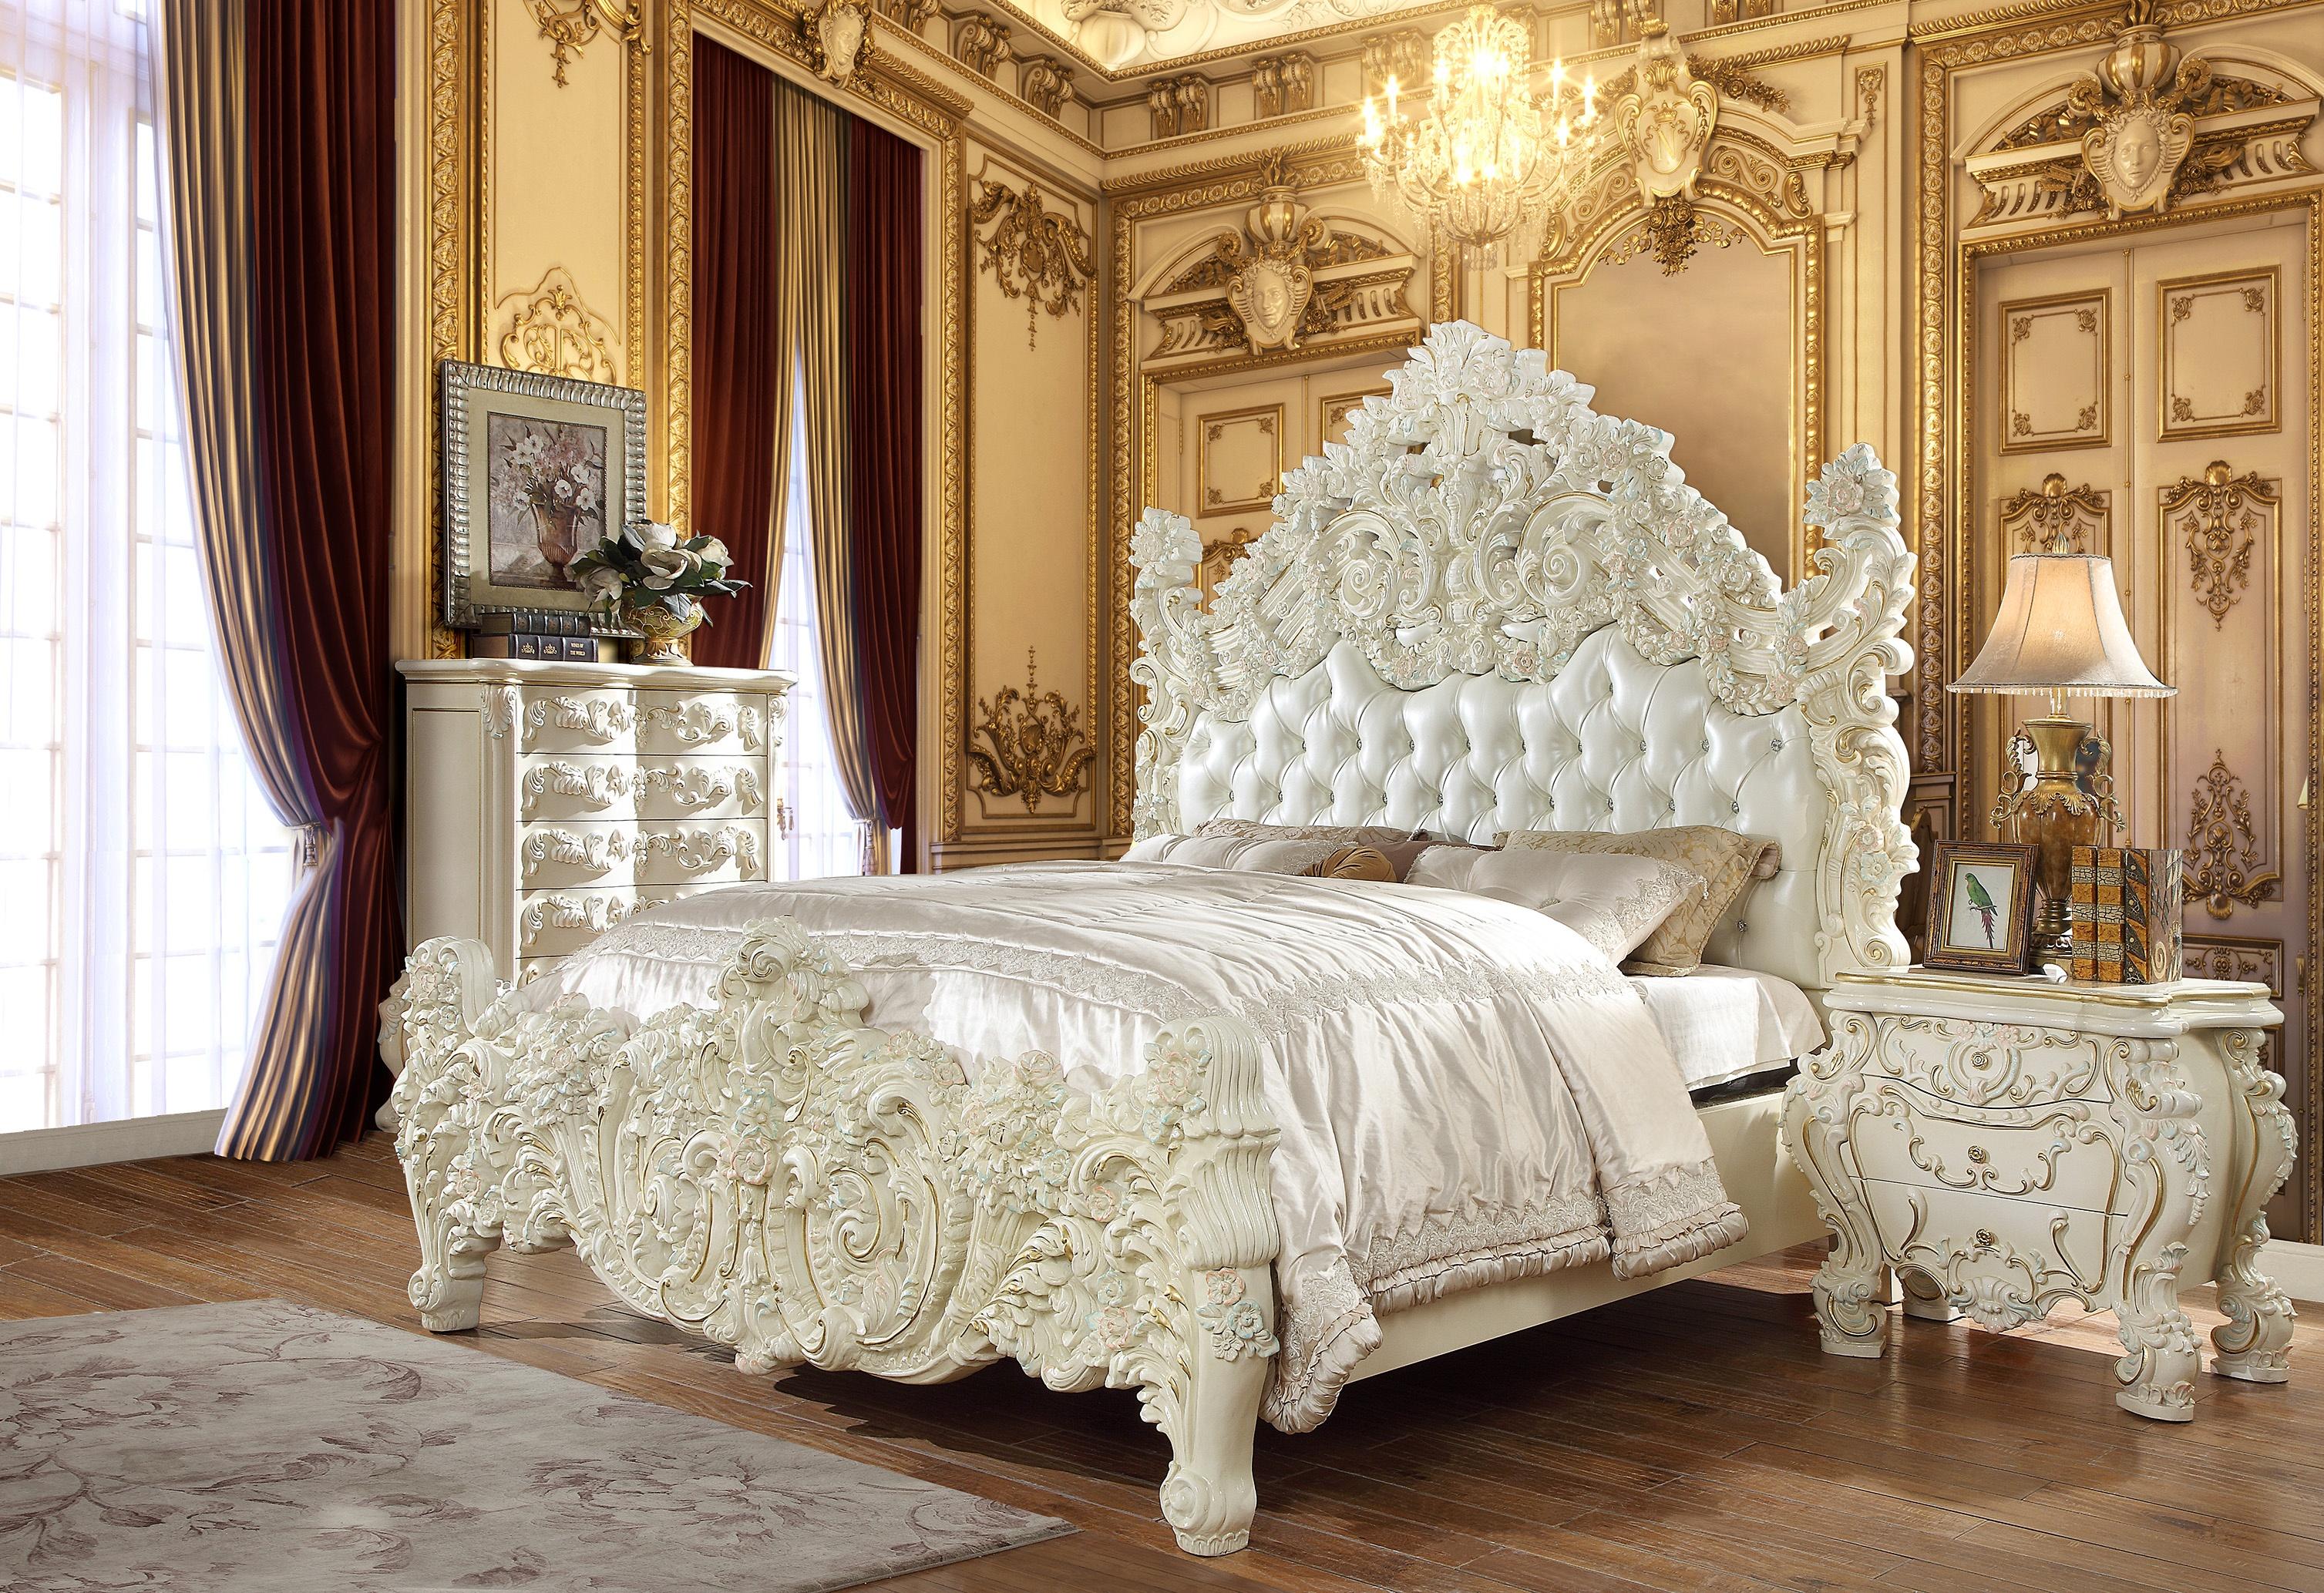 

    
Luxury Glossy White CAL King Bedroom Set 6Pcs Carved Wood Homey Design HD-8089
